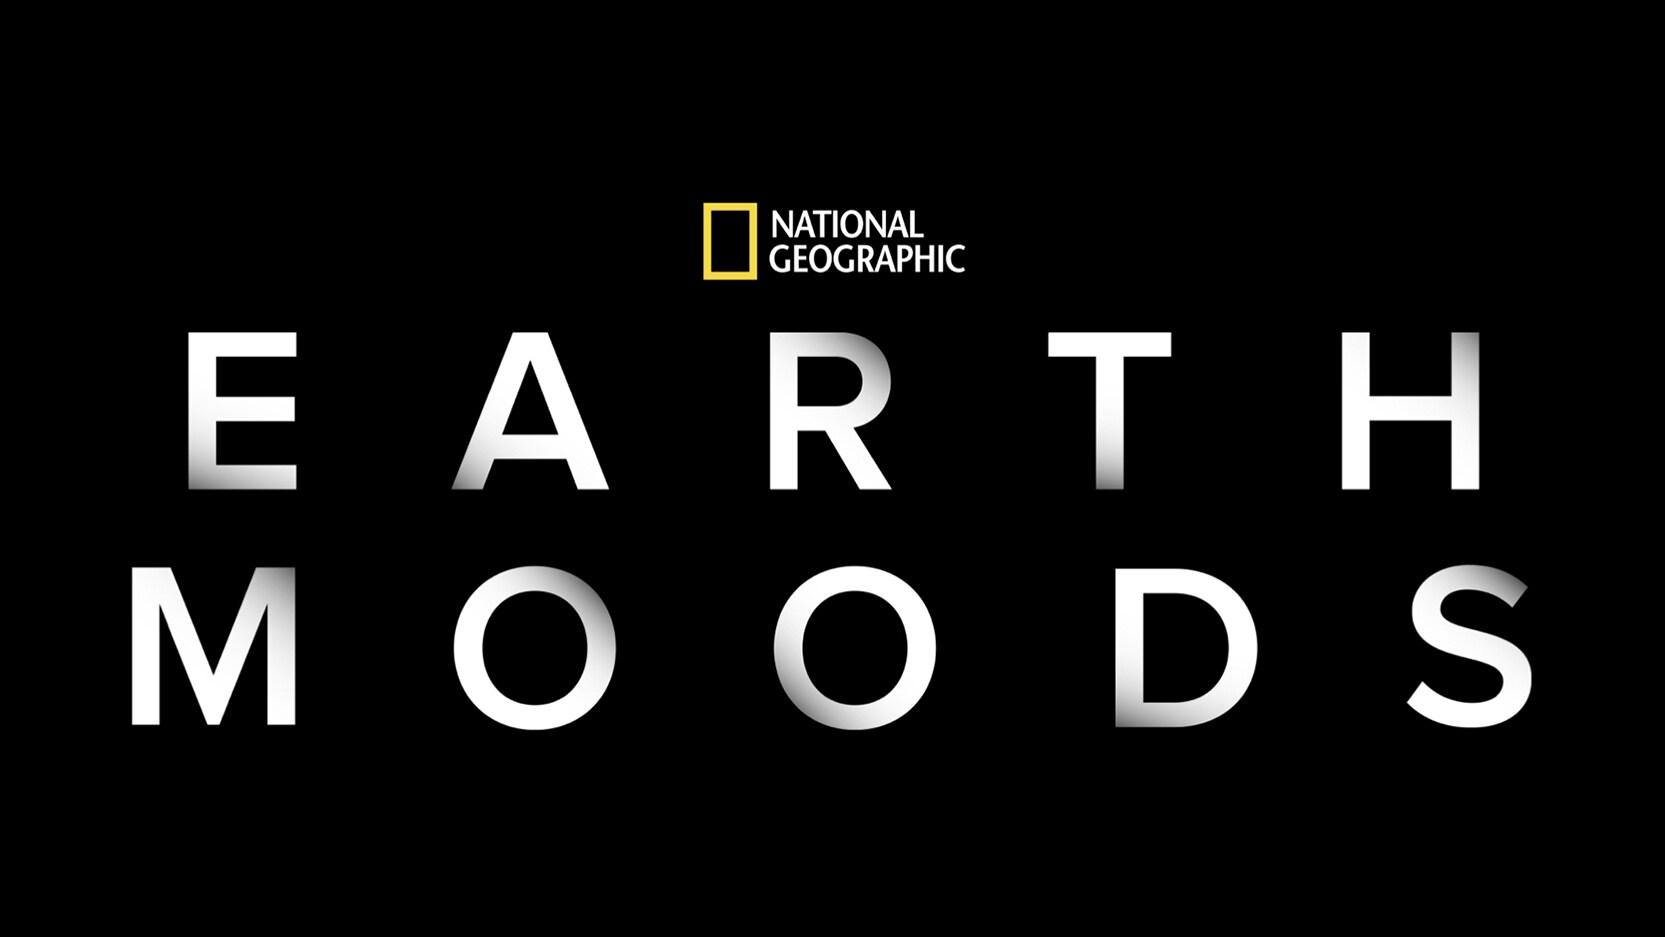       DISNEY+ RELEASES FIRST LOOK TRAILER AND KEY ART FOR “EARTH MOODS” FROM NATIONAL GEOGRAPHIC 